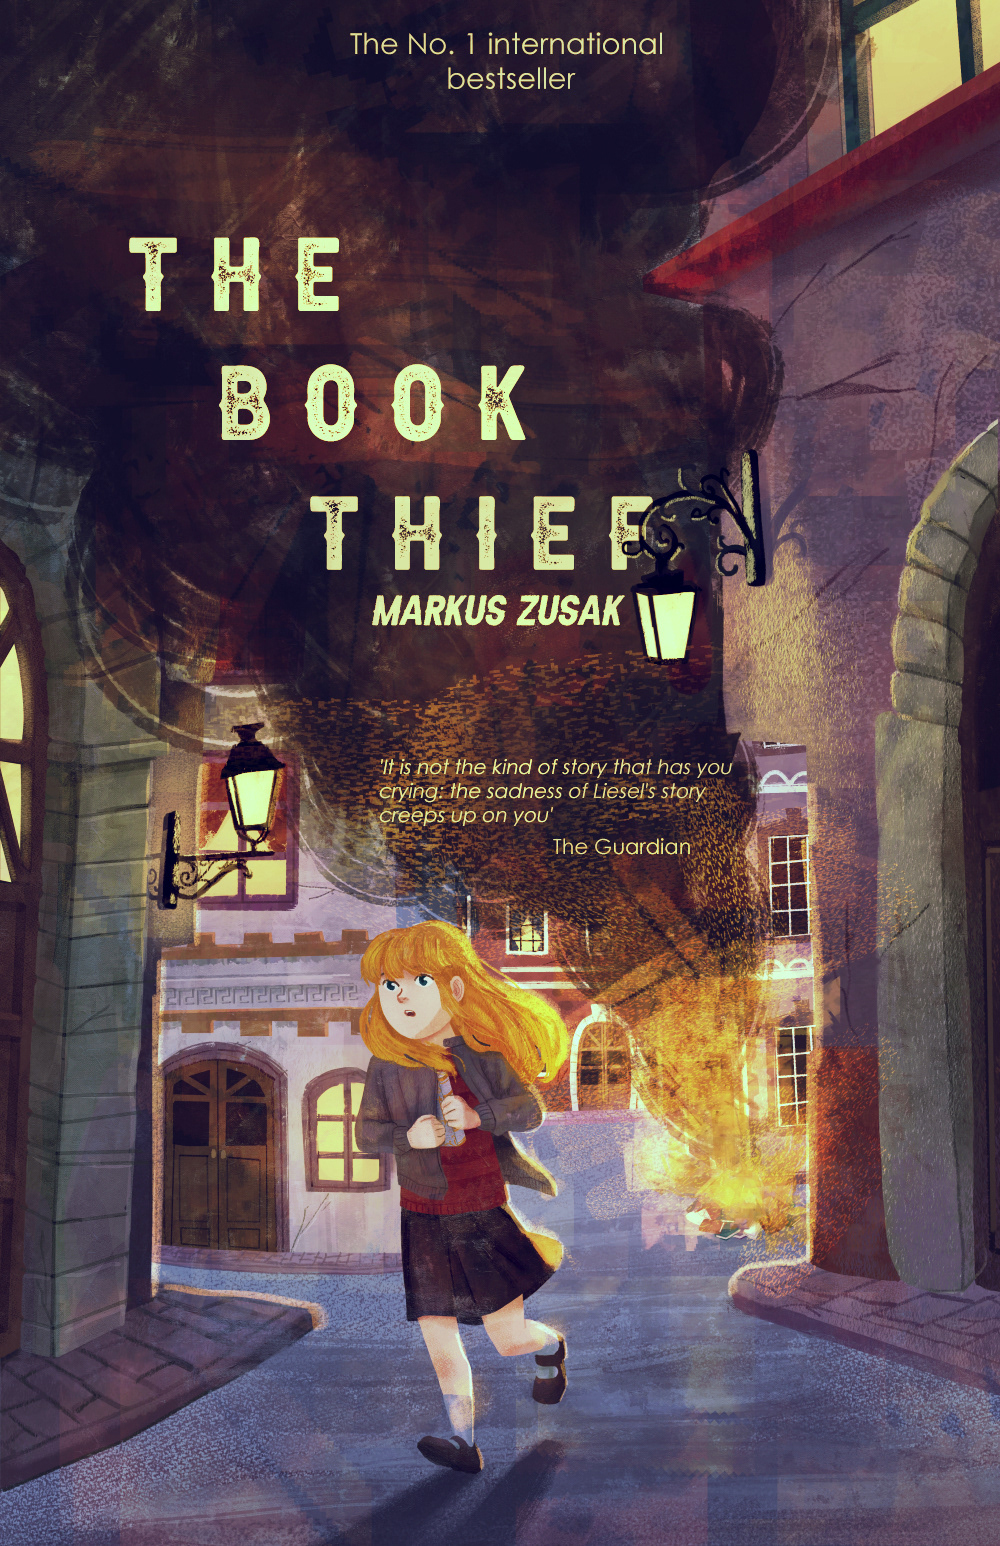 Book burning cover cover illustration markus zusak Middle grade Middle Grade Book middle grade book cover The book thief towm